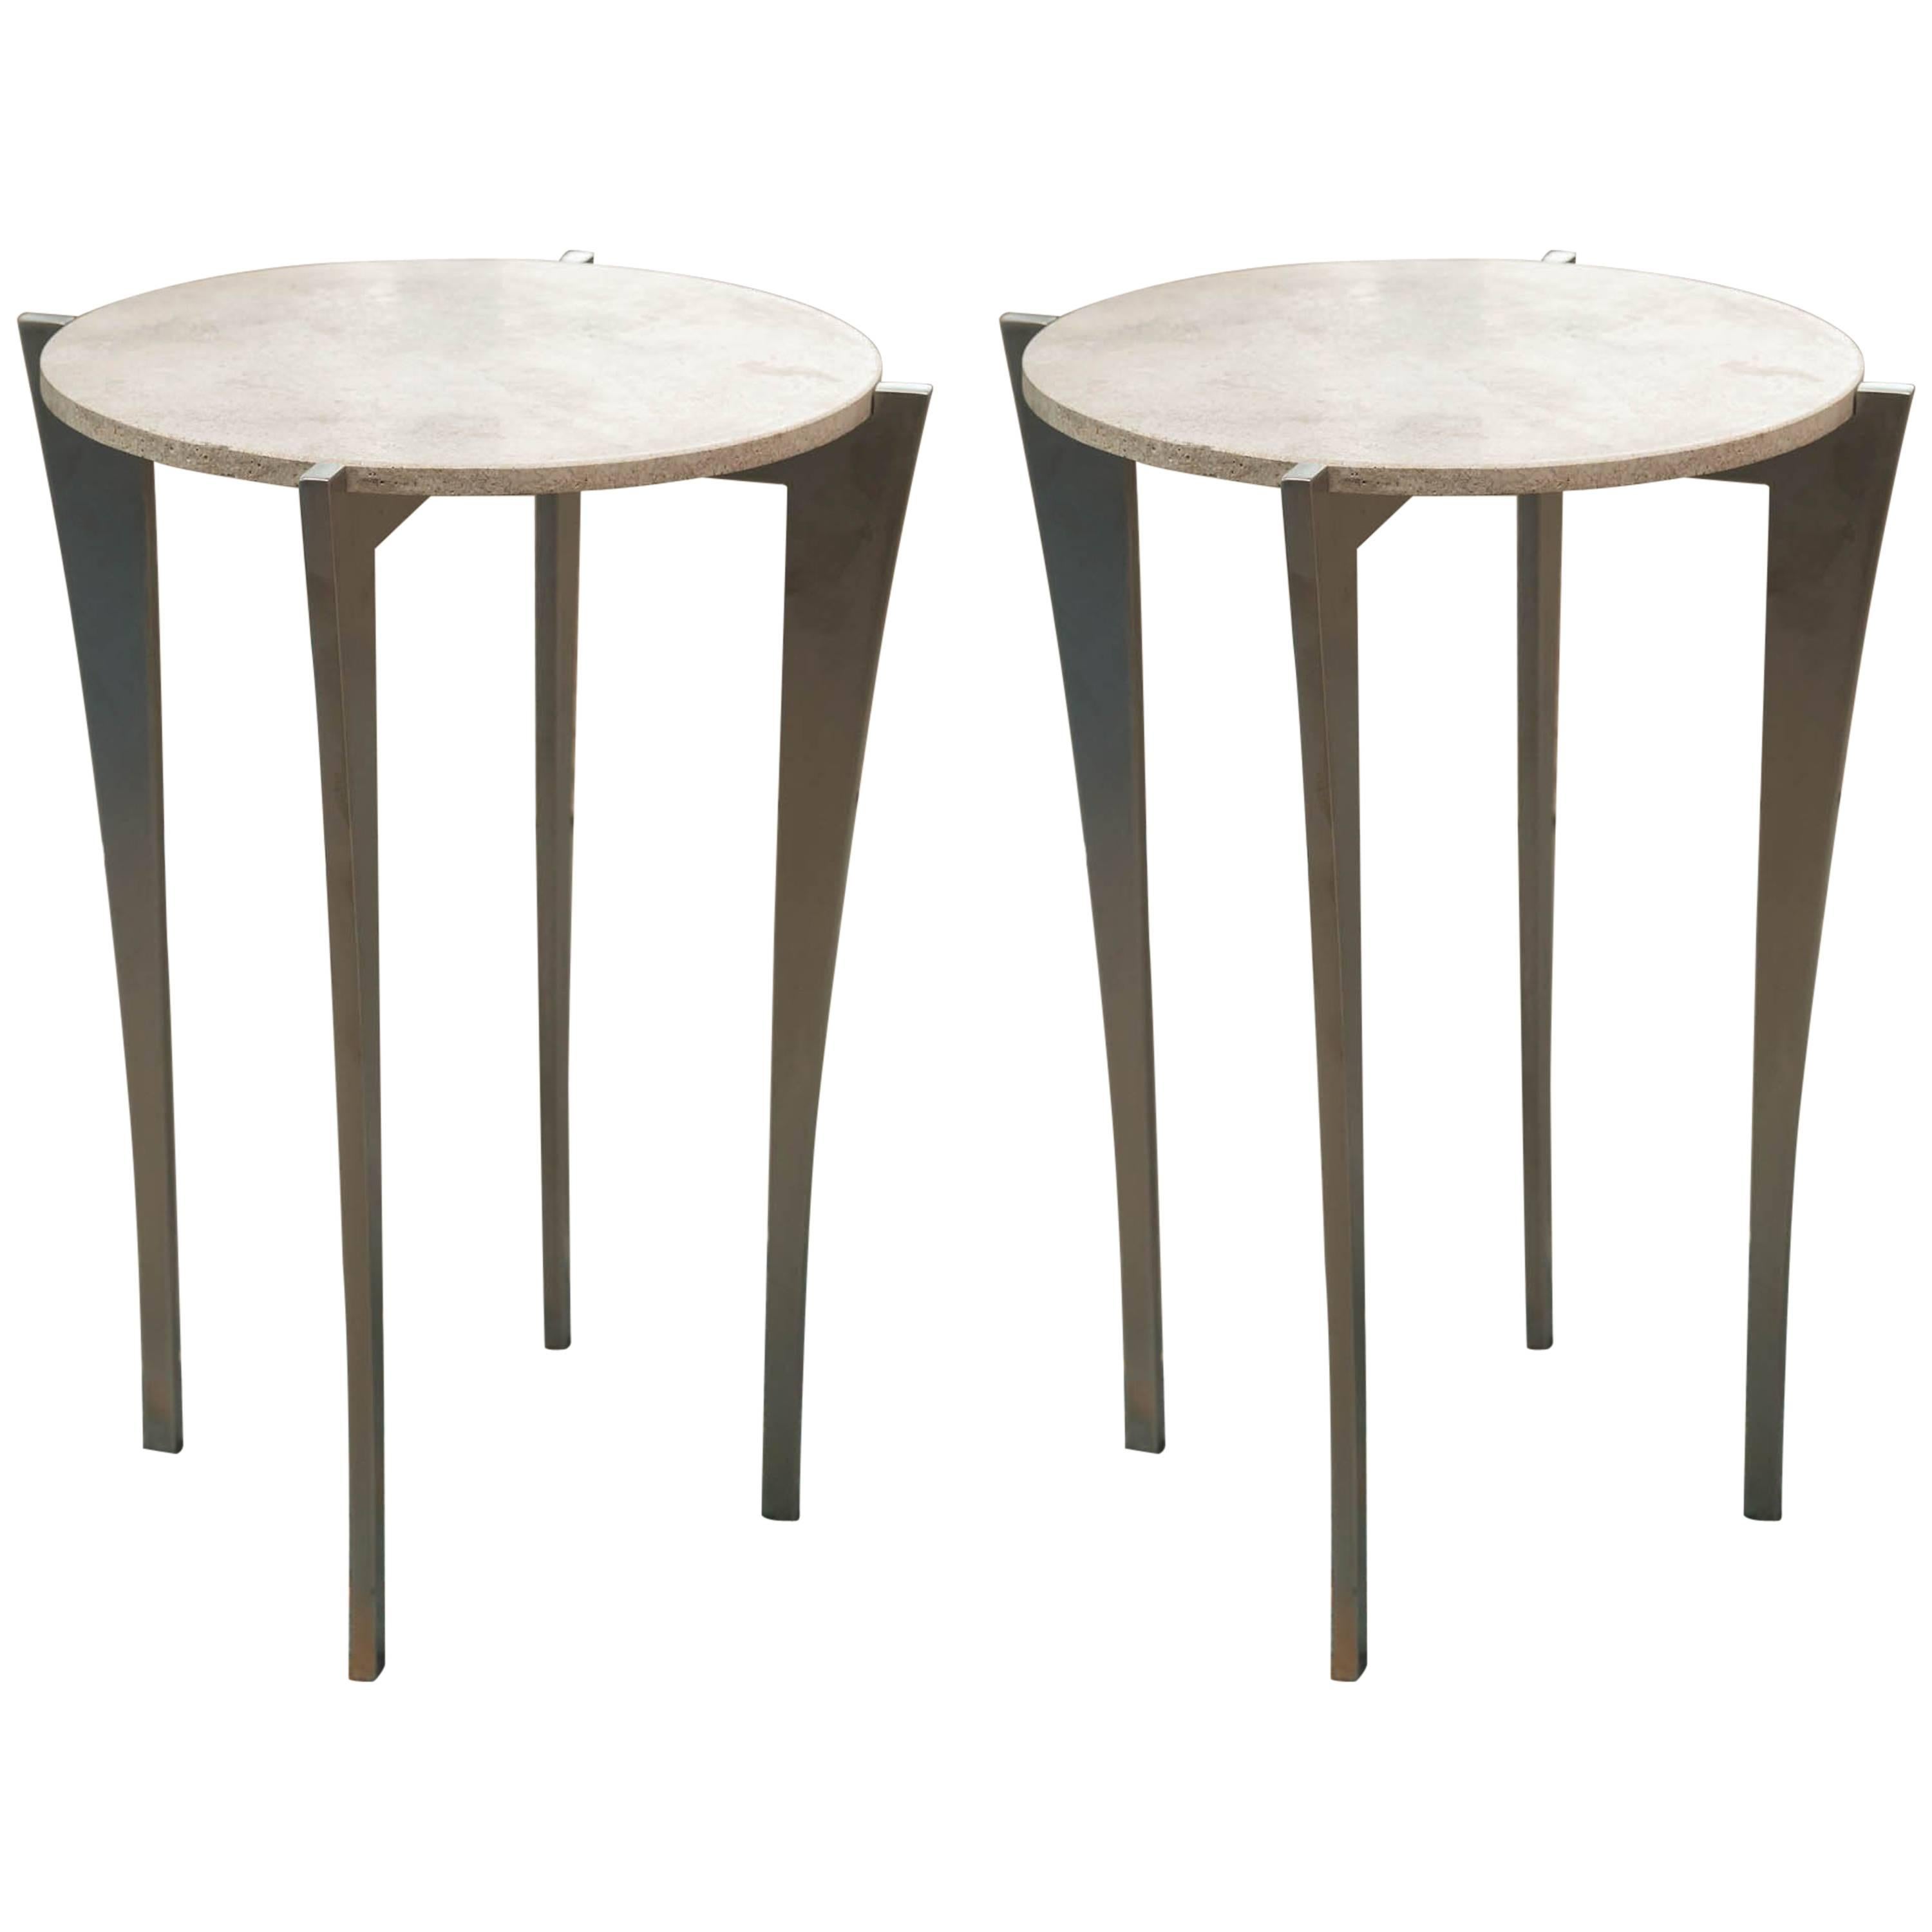 Pair of Stainless Steel and Stone Side Tables by Gregory Clark